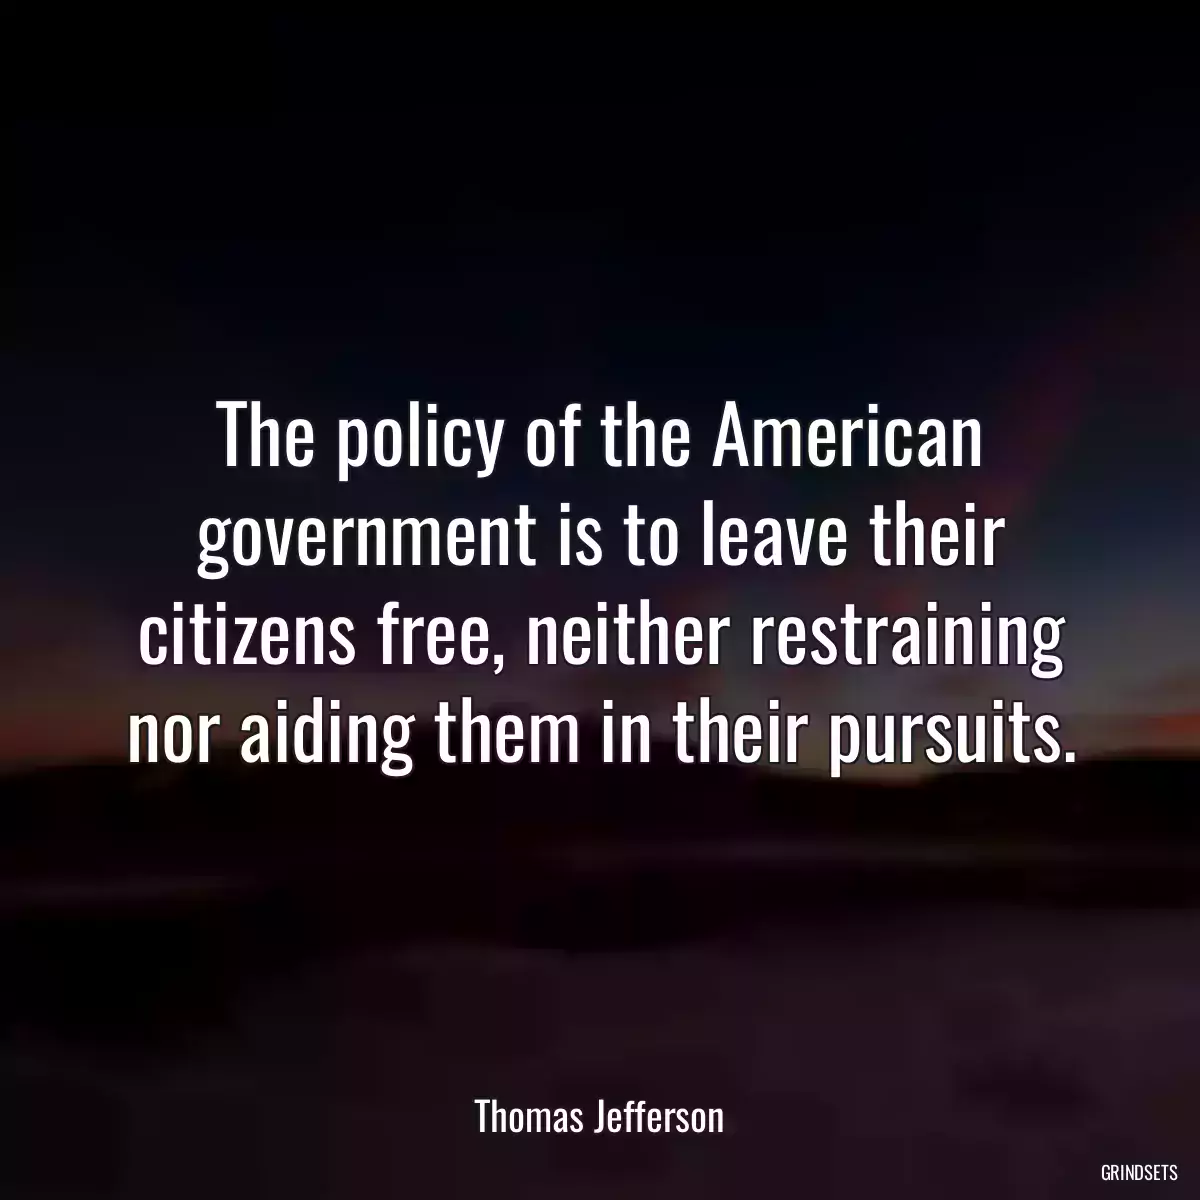 The policy of the American government is to leave their citizens free, neither restraining nor aiding them in their pursuits.